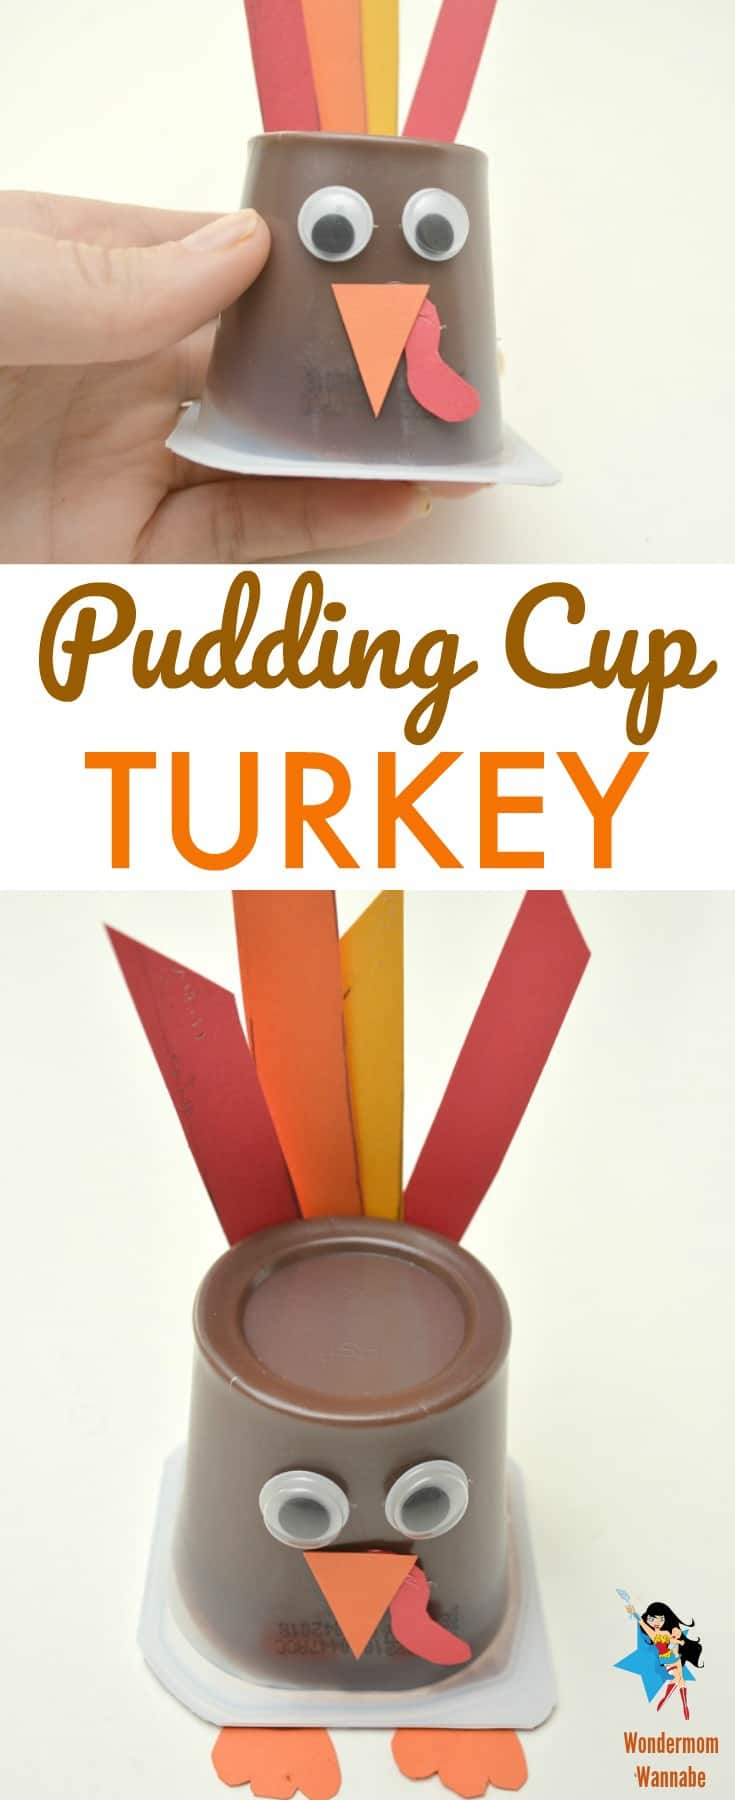 Pudding Cup Turkey